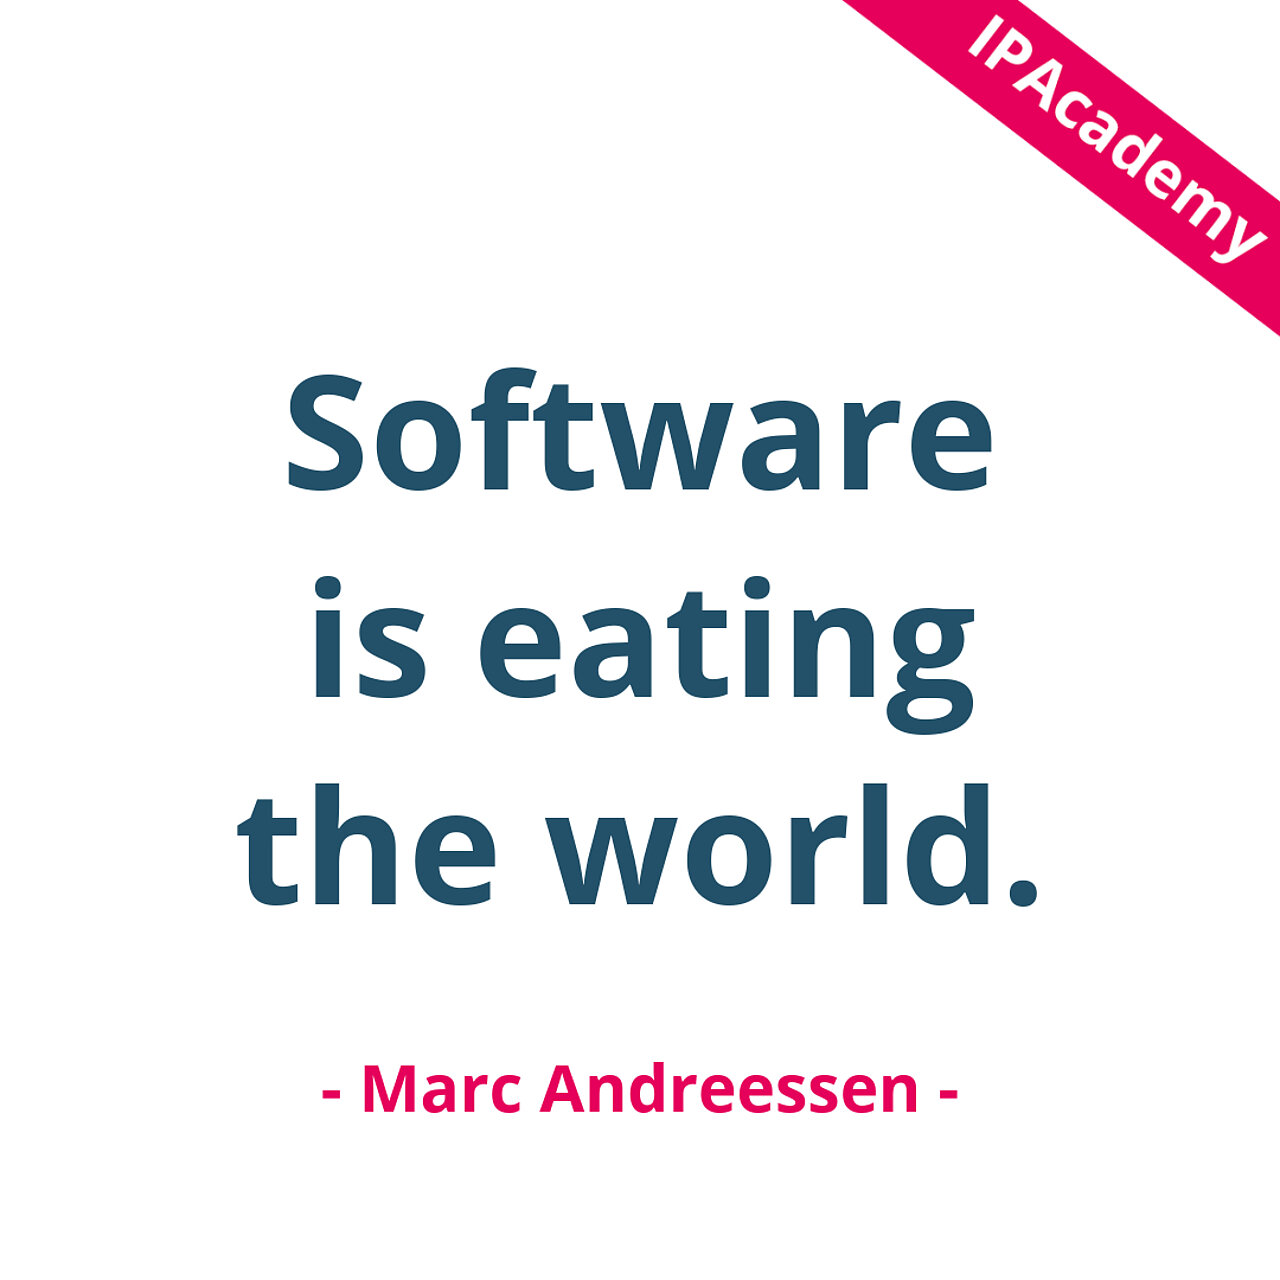 Software is eating the world.